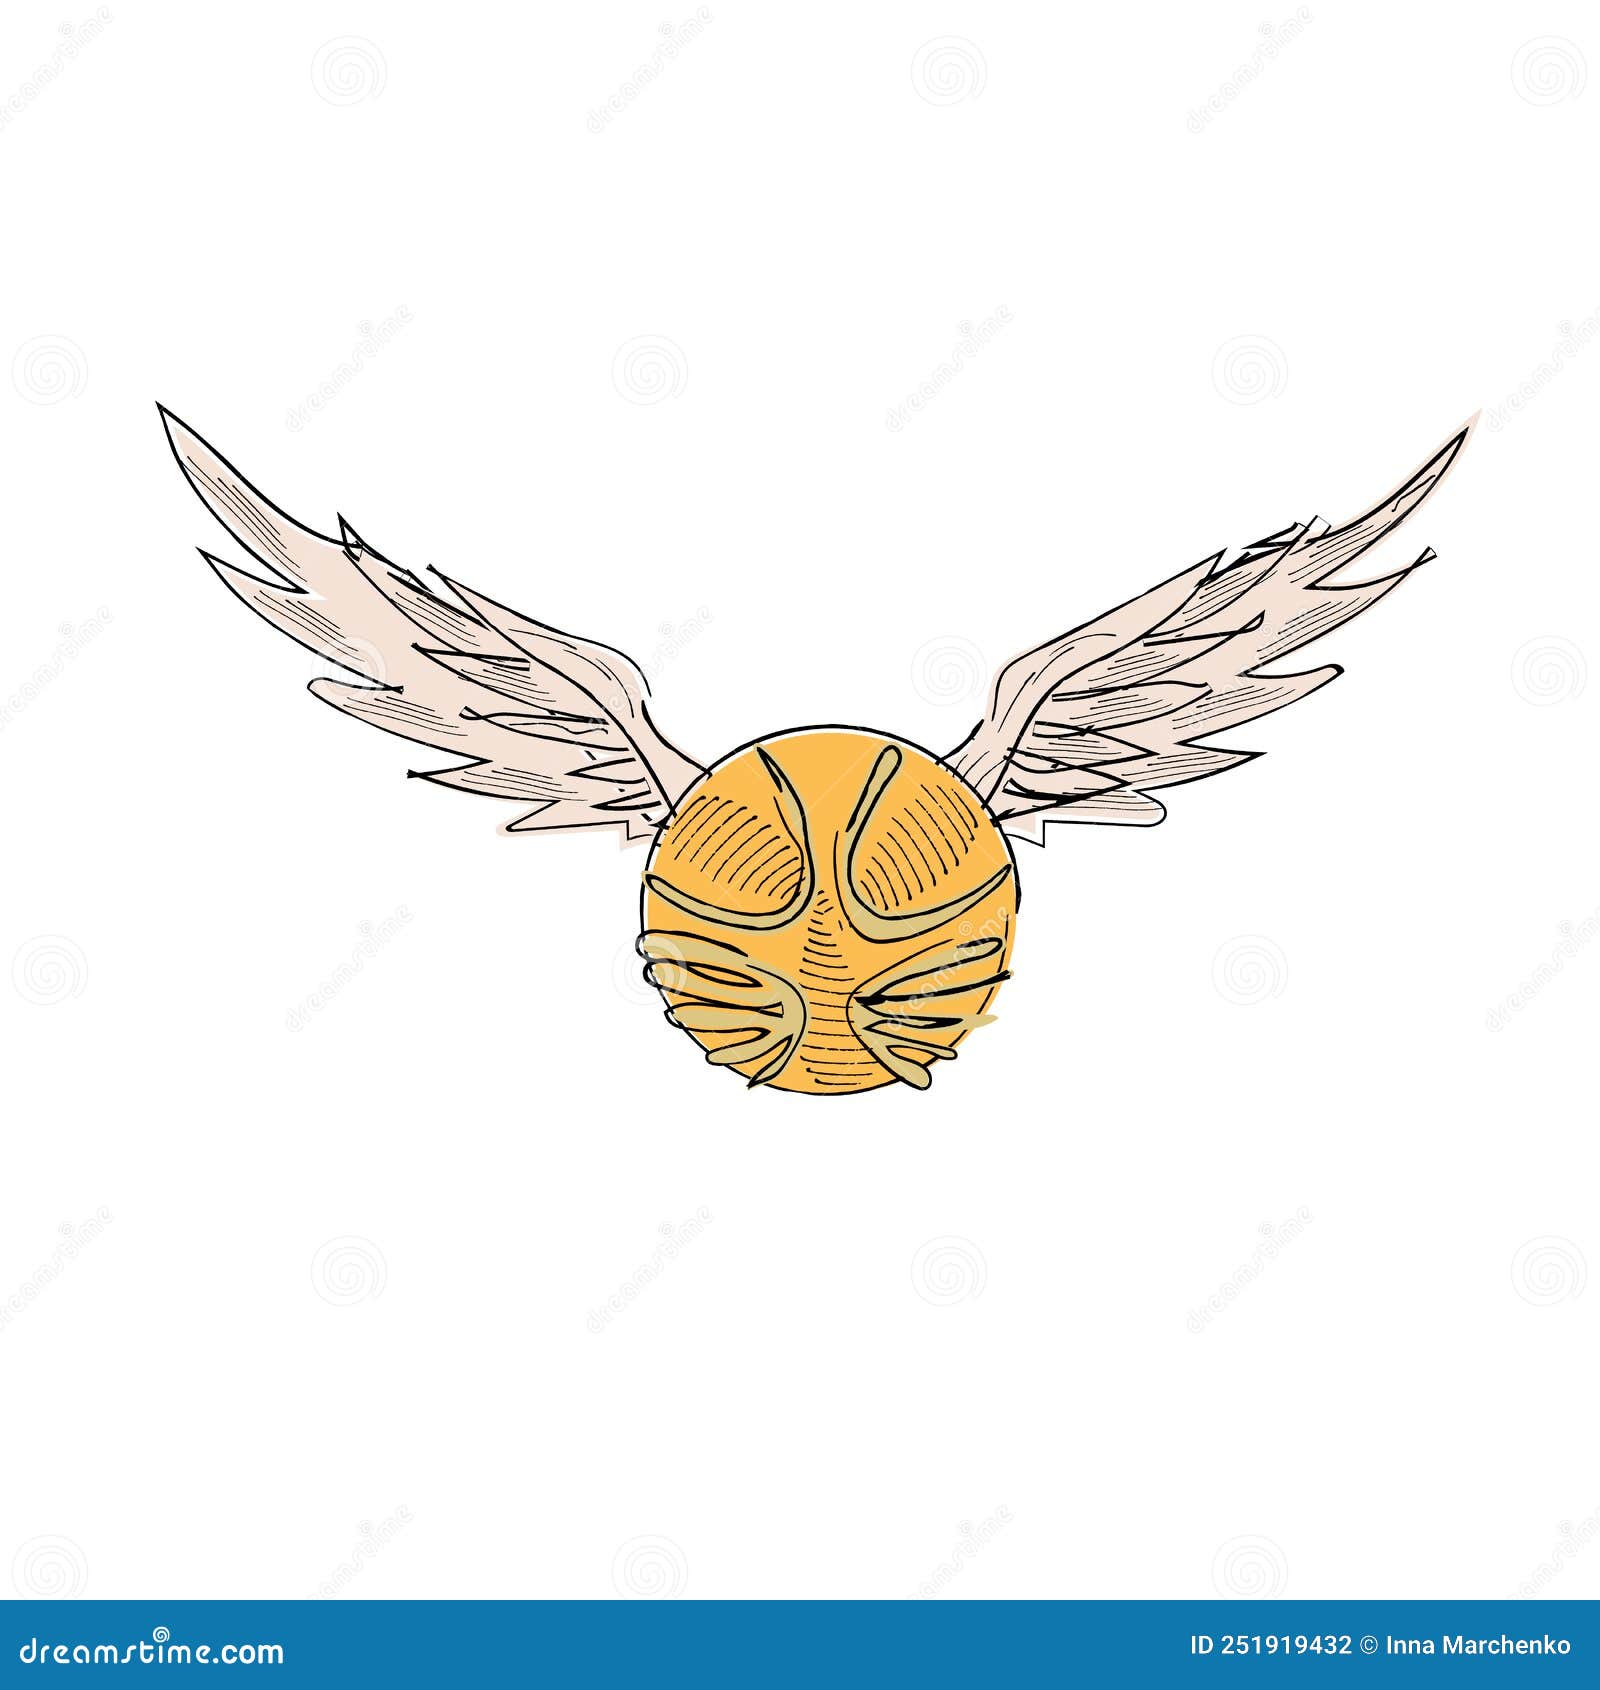 Download Cute Harry Potter Golden Snitch Wallpaper